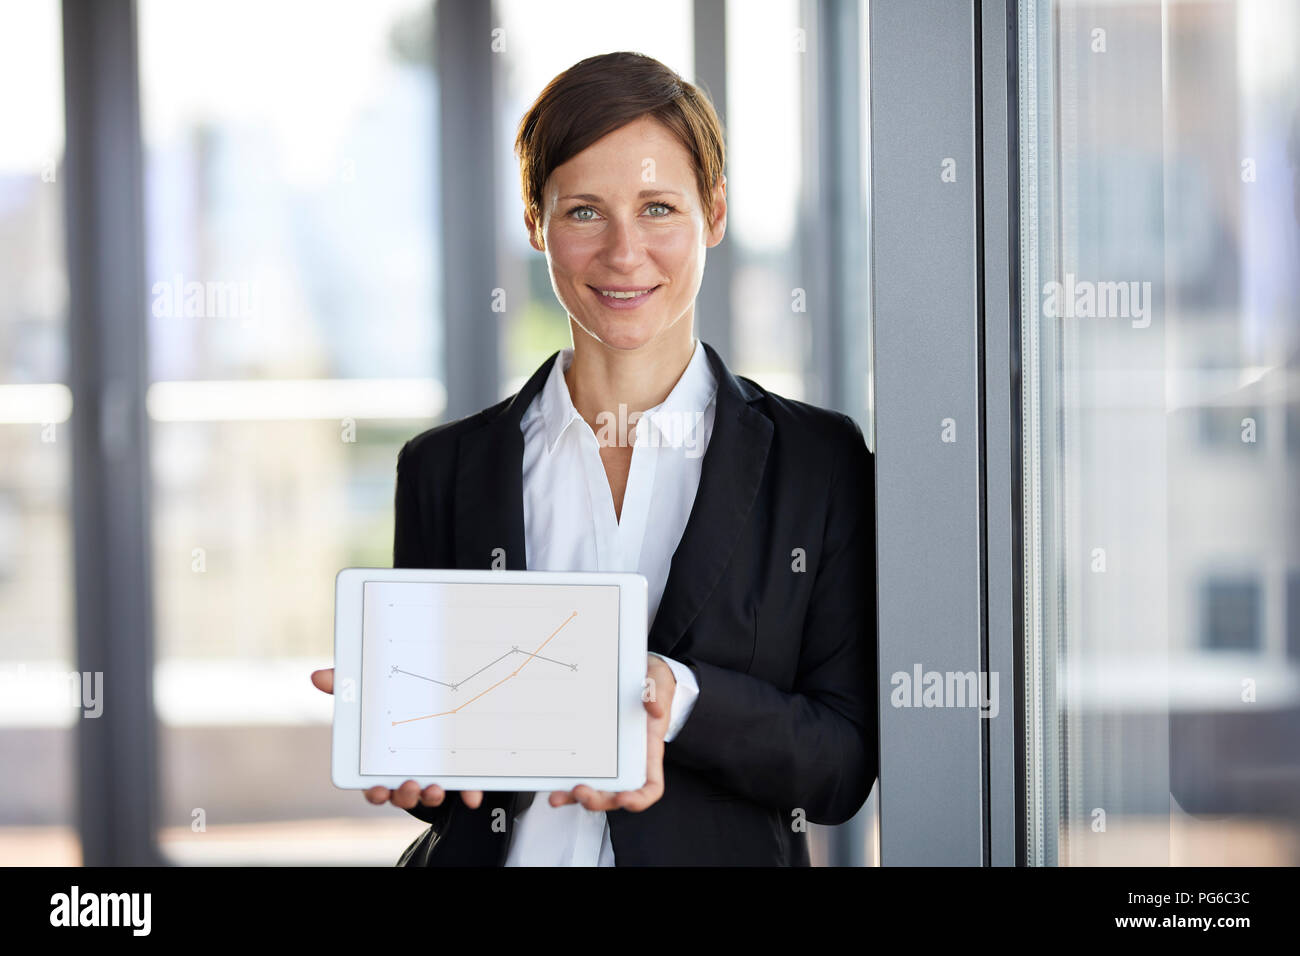 Portrait of smiling businesswoman in office holding tablet showing ascending line graph Stock Photo